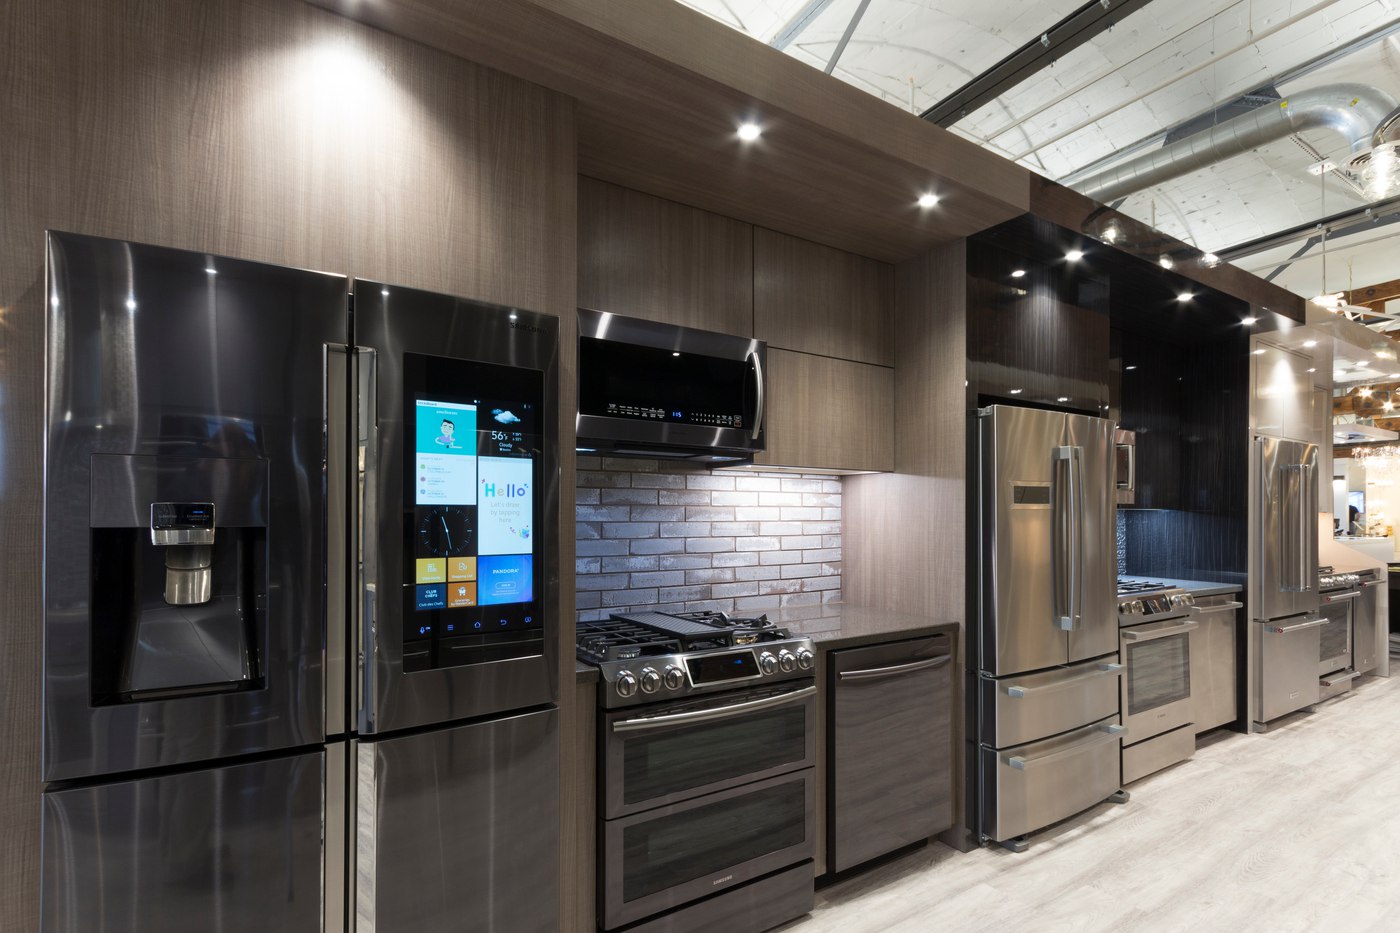 samsung vs. lg stainless kitchen packages (reviews / ratings / prices)